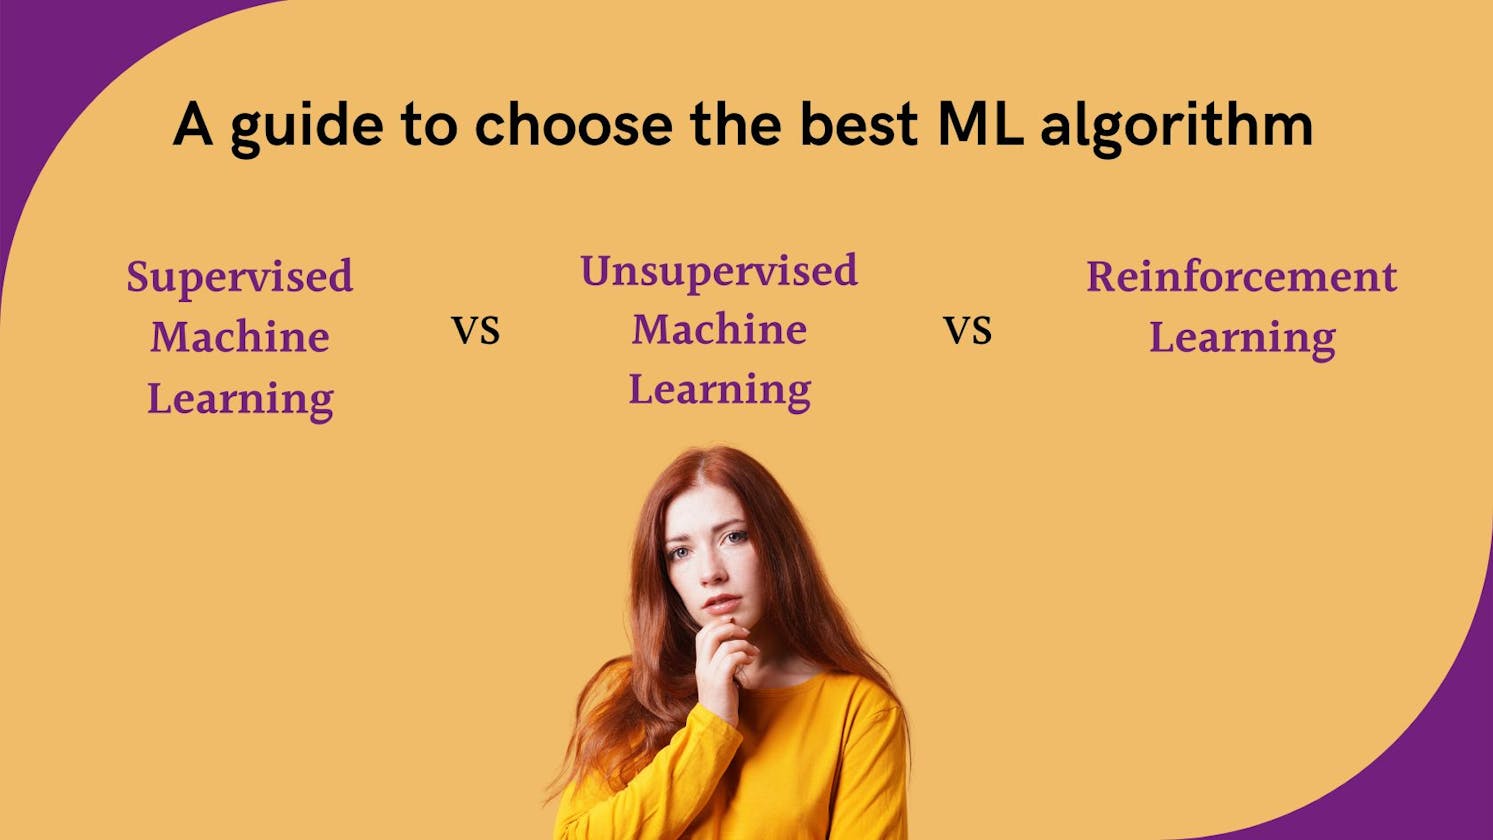 A comparison of different machine learning algorithms and when to use each one